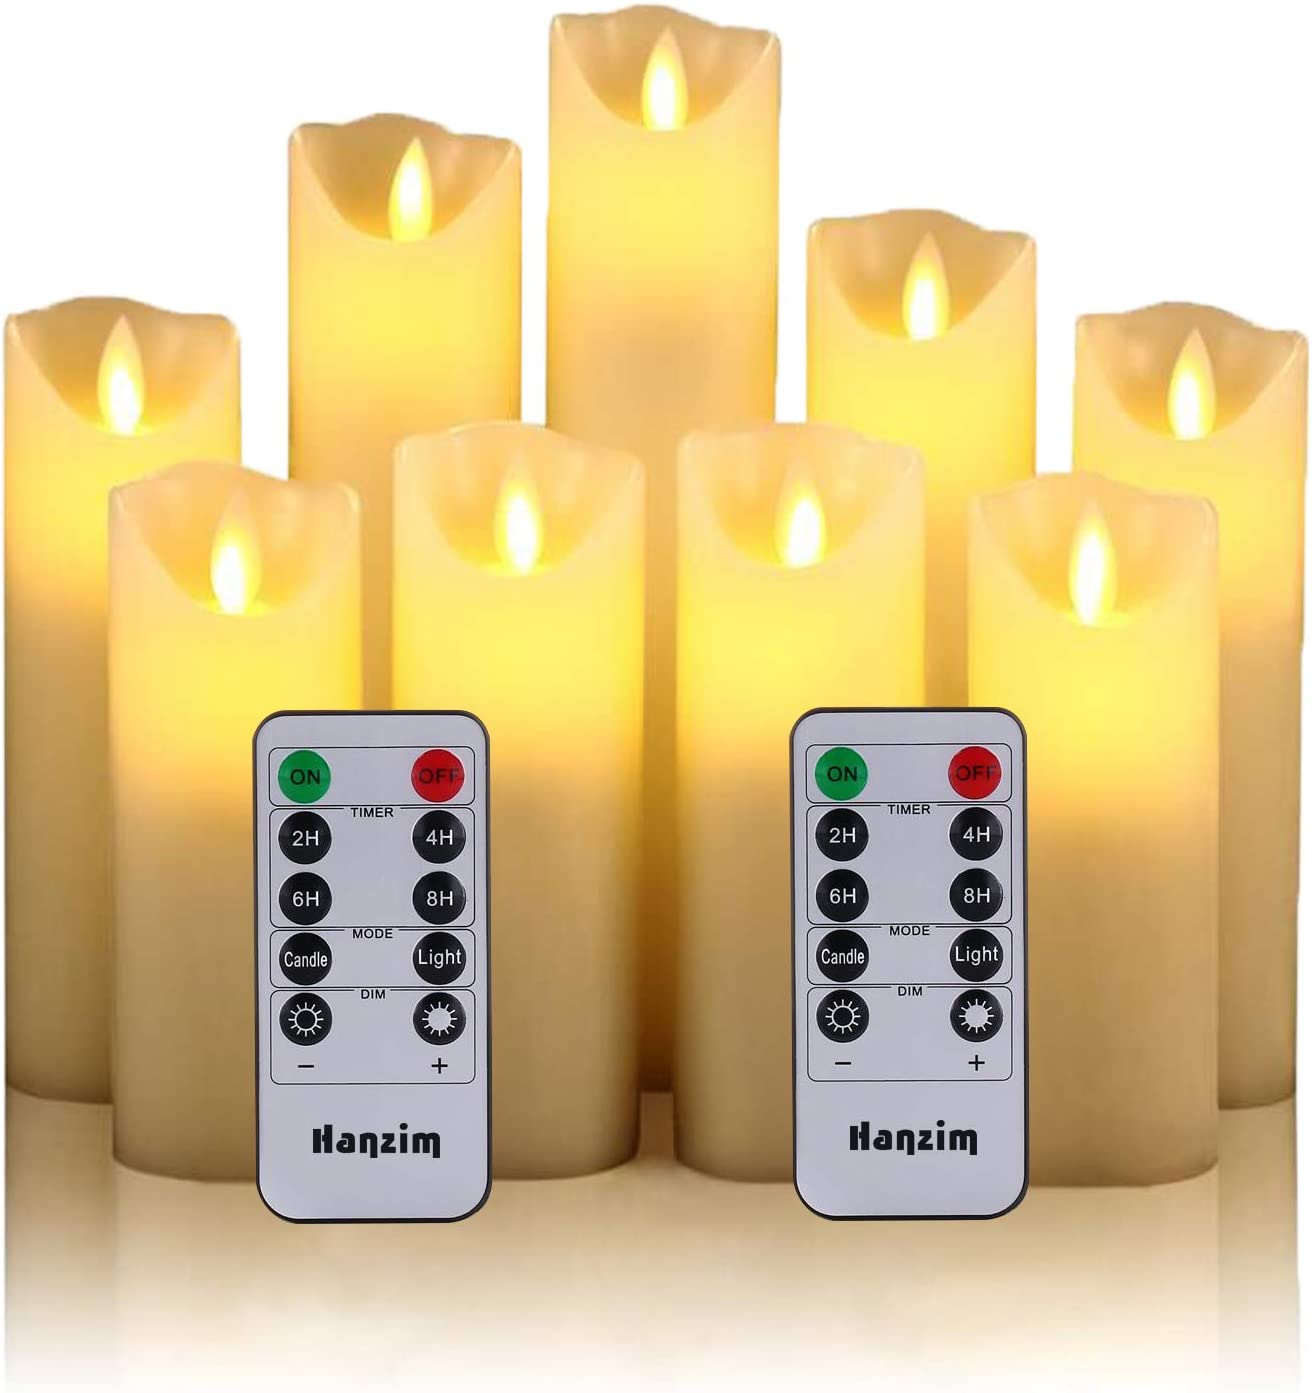 Amazon Lightning Deal: 9-Count Hanzim Flameless LED Battery Operated Candles w/ 2 Remote Control $15 + Free Shipping